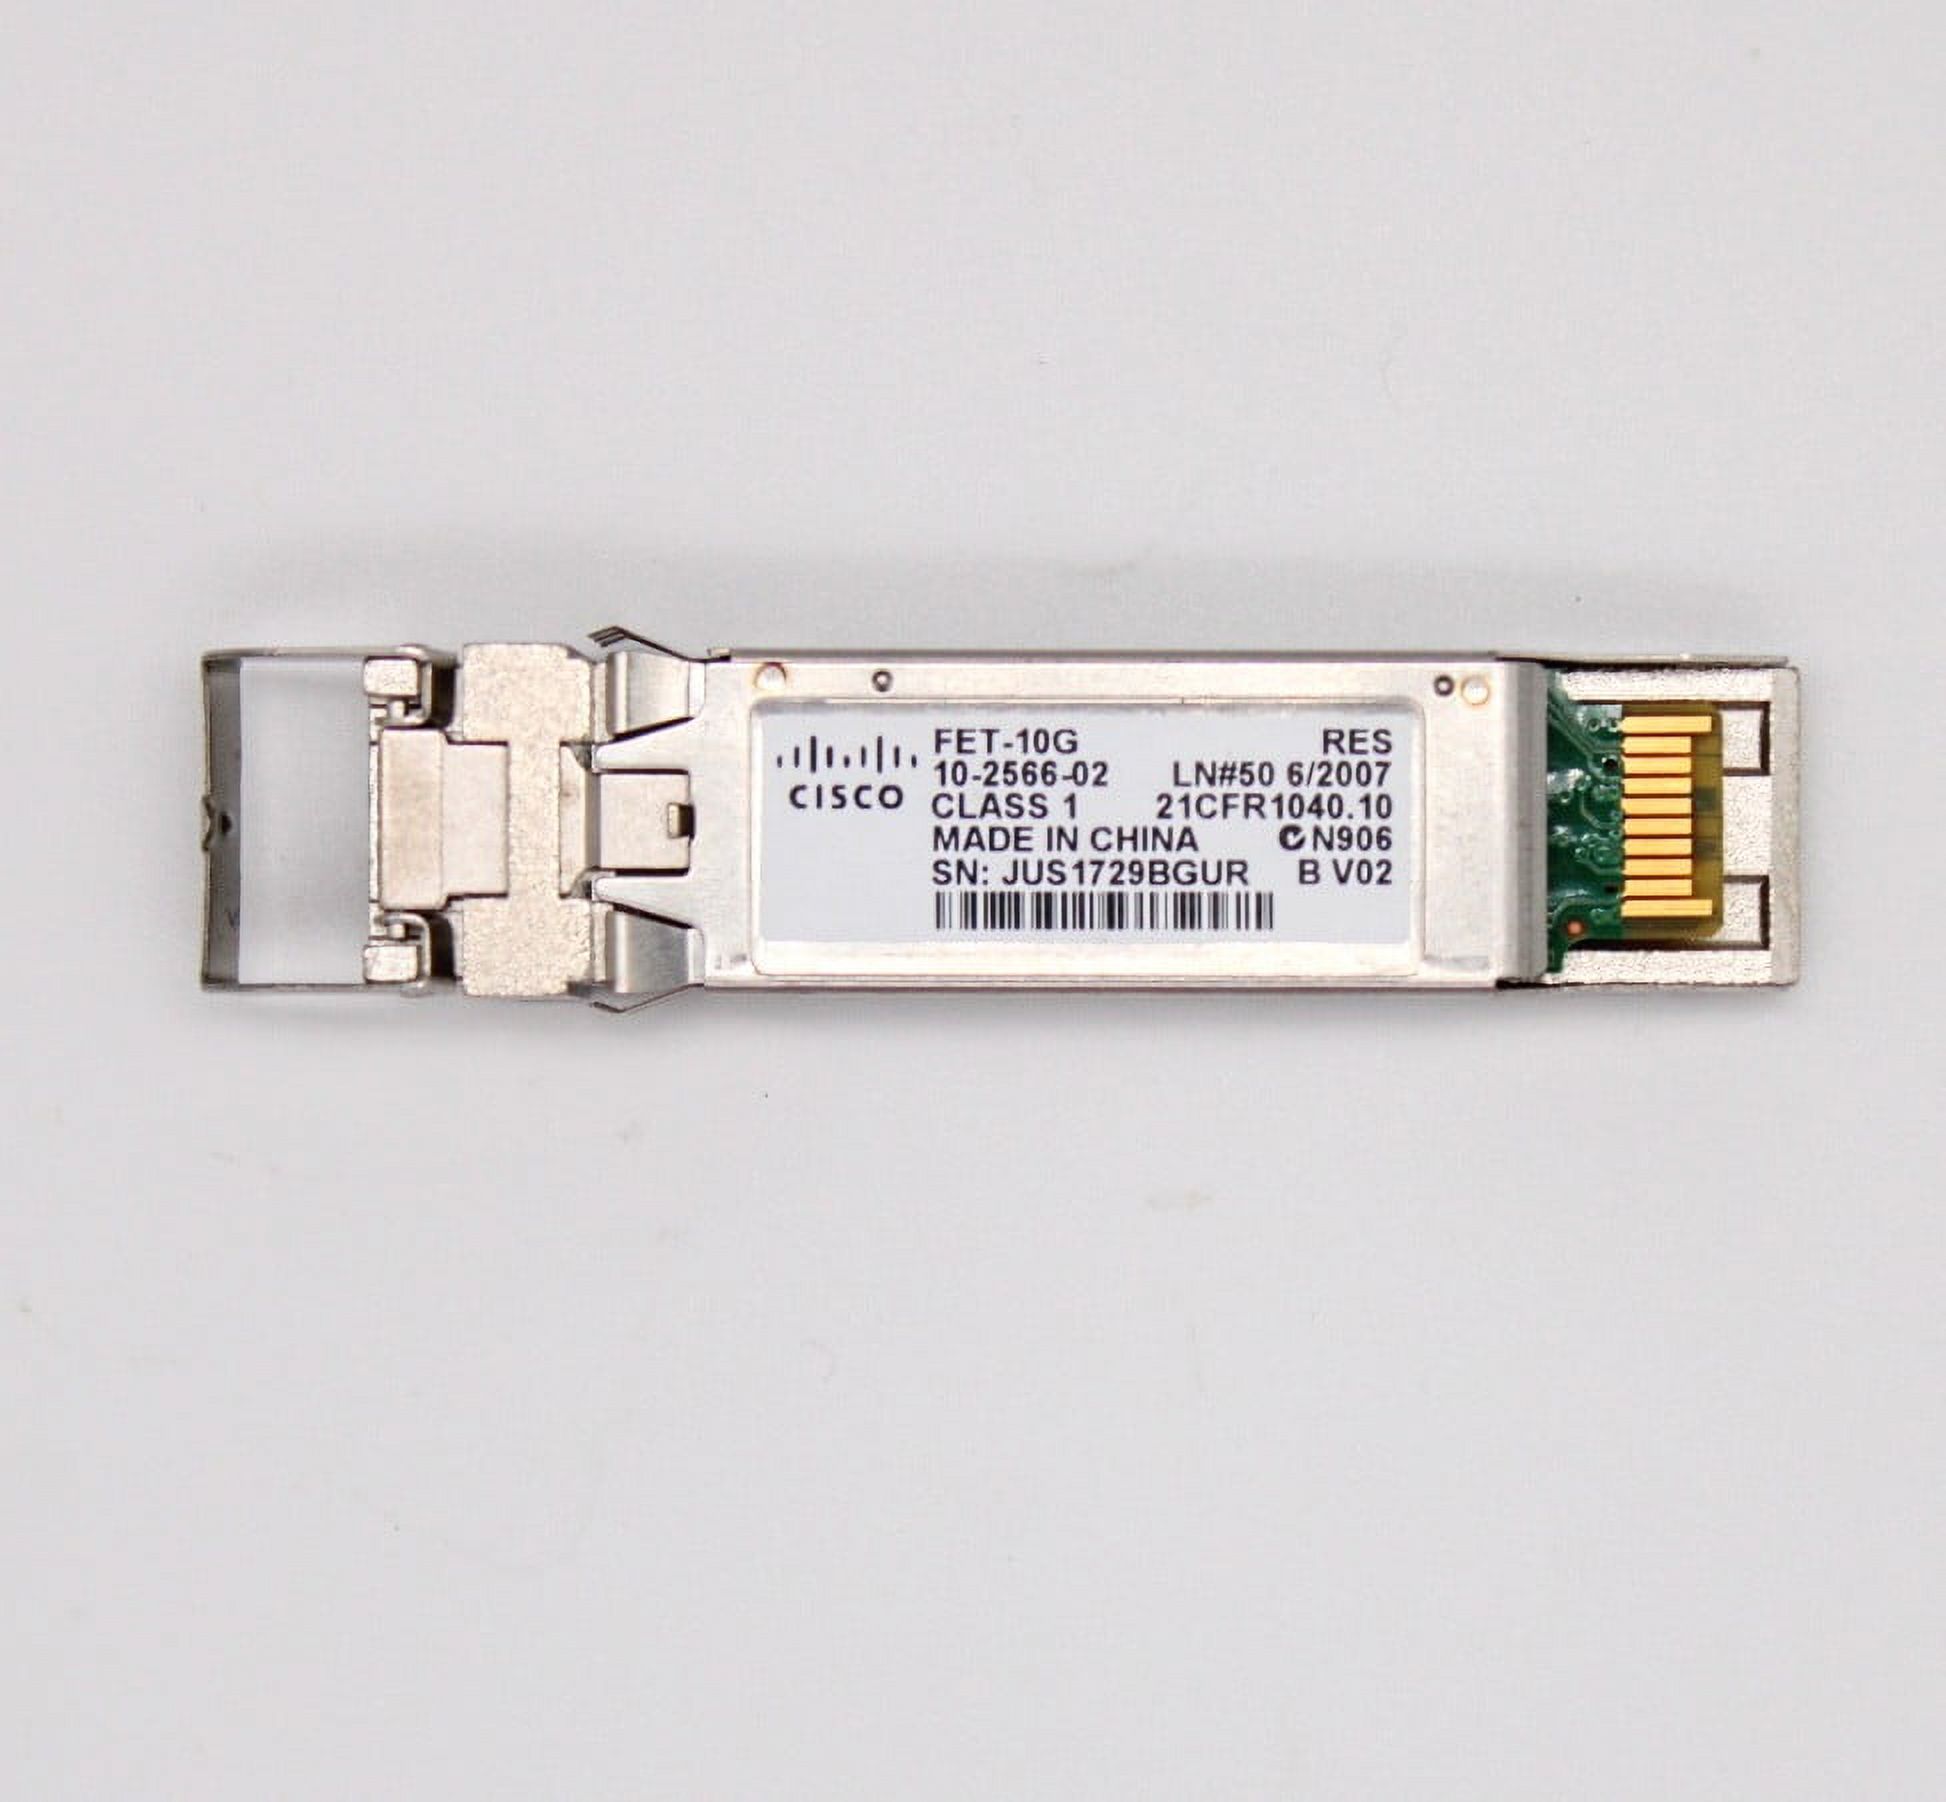 Used - Cisco FET-10G SFP LC/PC Multi-Mode Fabric Extender Transceiver - image 1 of 3